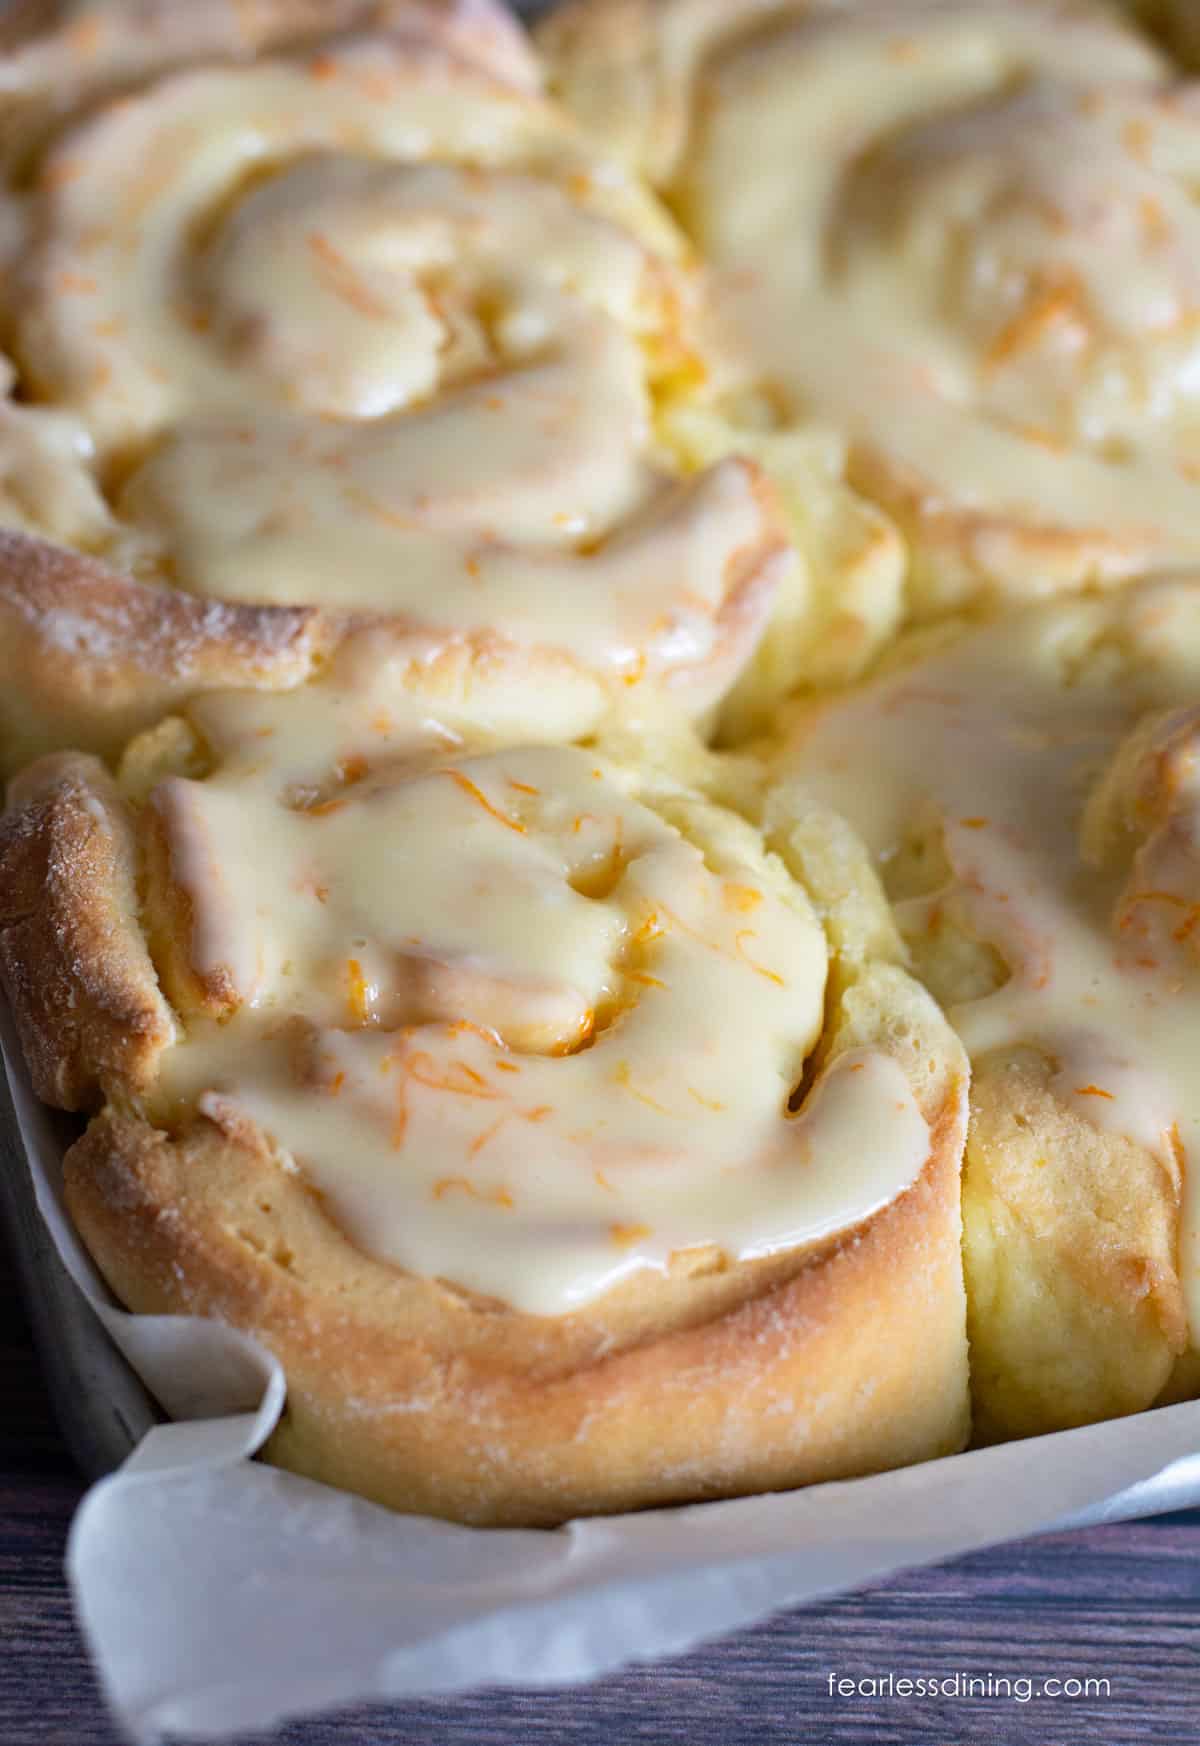 Check out these big fluffy gluten free orange rolls rolled up with an orange icing.